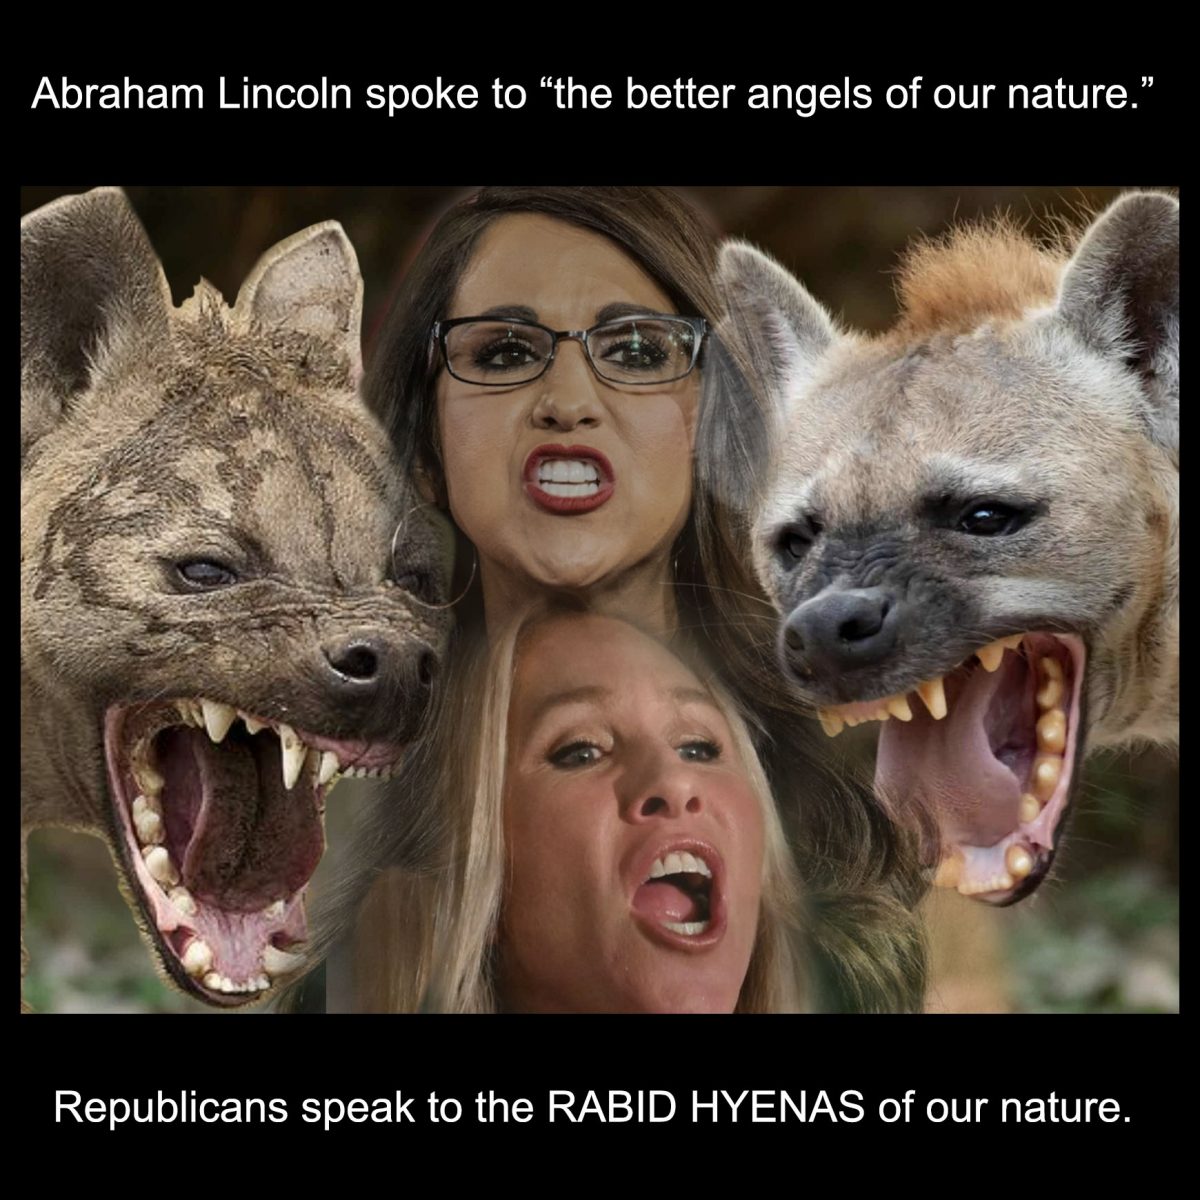 SCIENTIFIC NATURE SHIT: The Difference Between The Party Of Lincoln And Republicans Now Is Explained Using Wildlife.